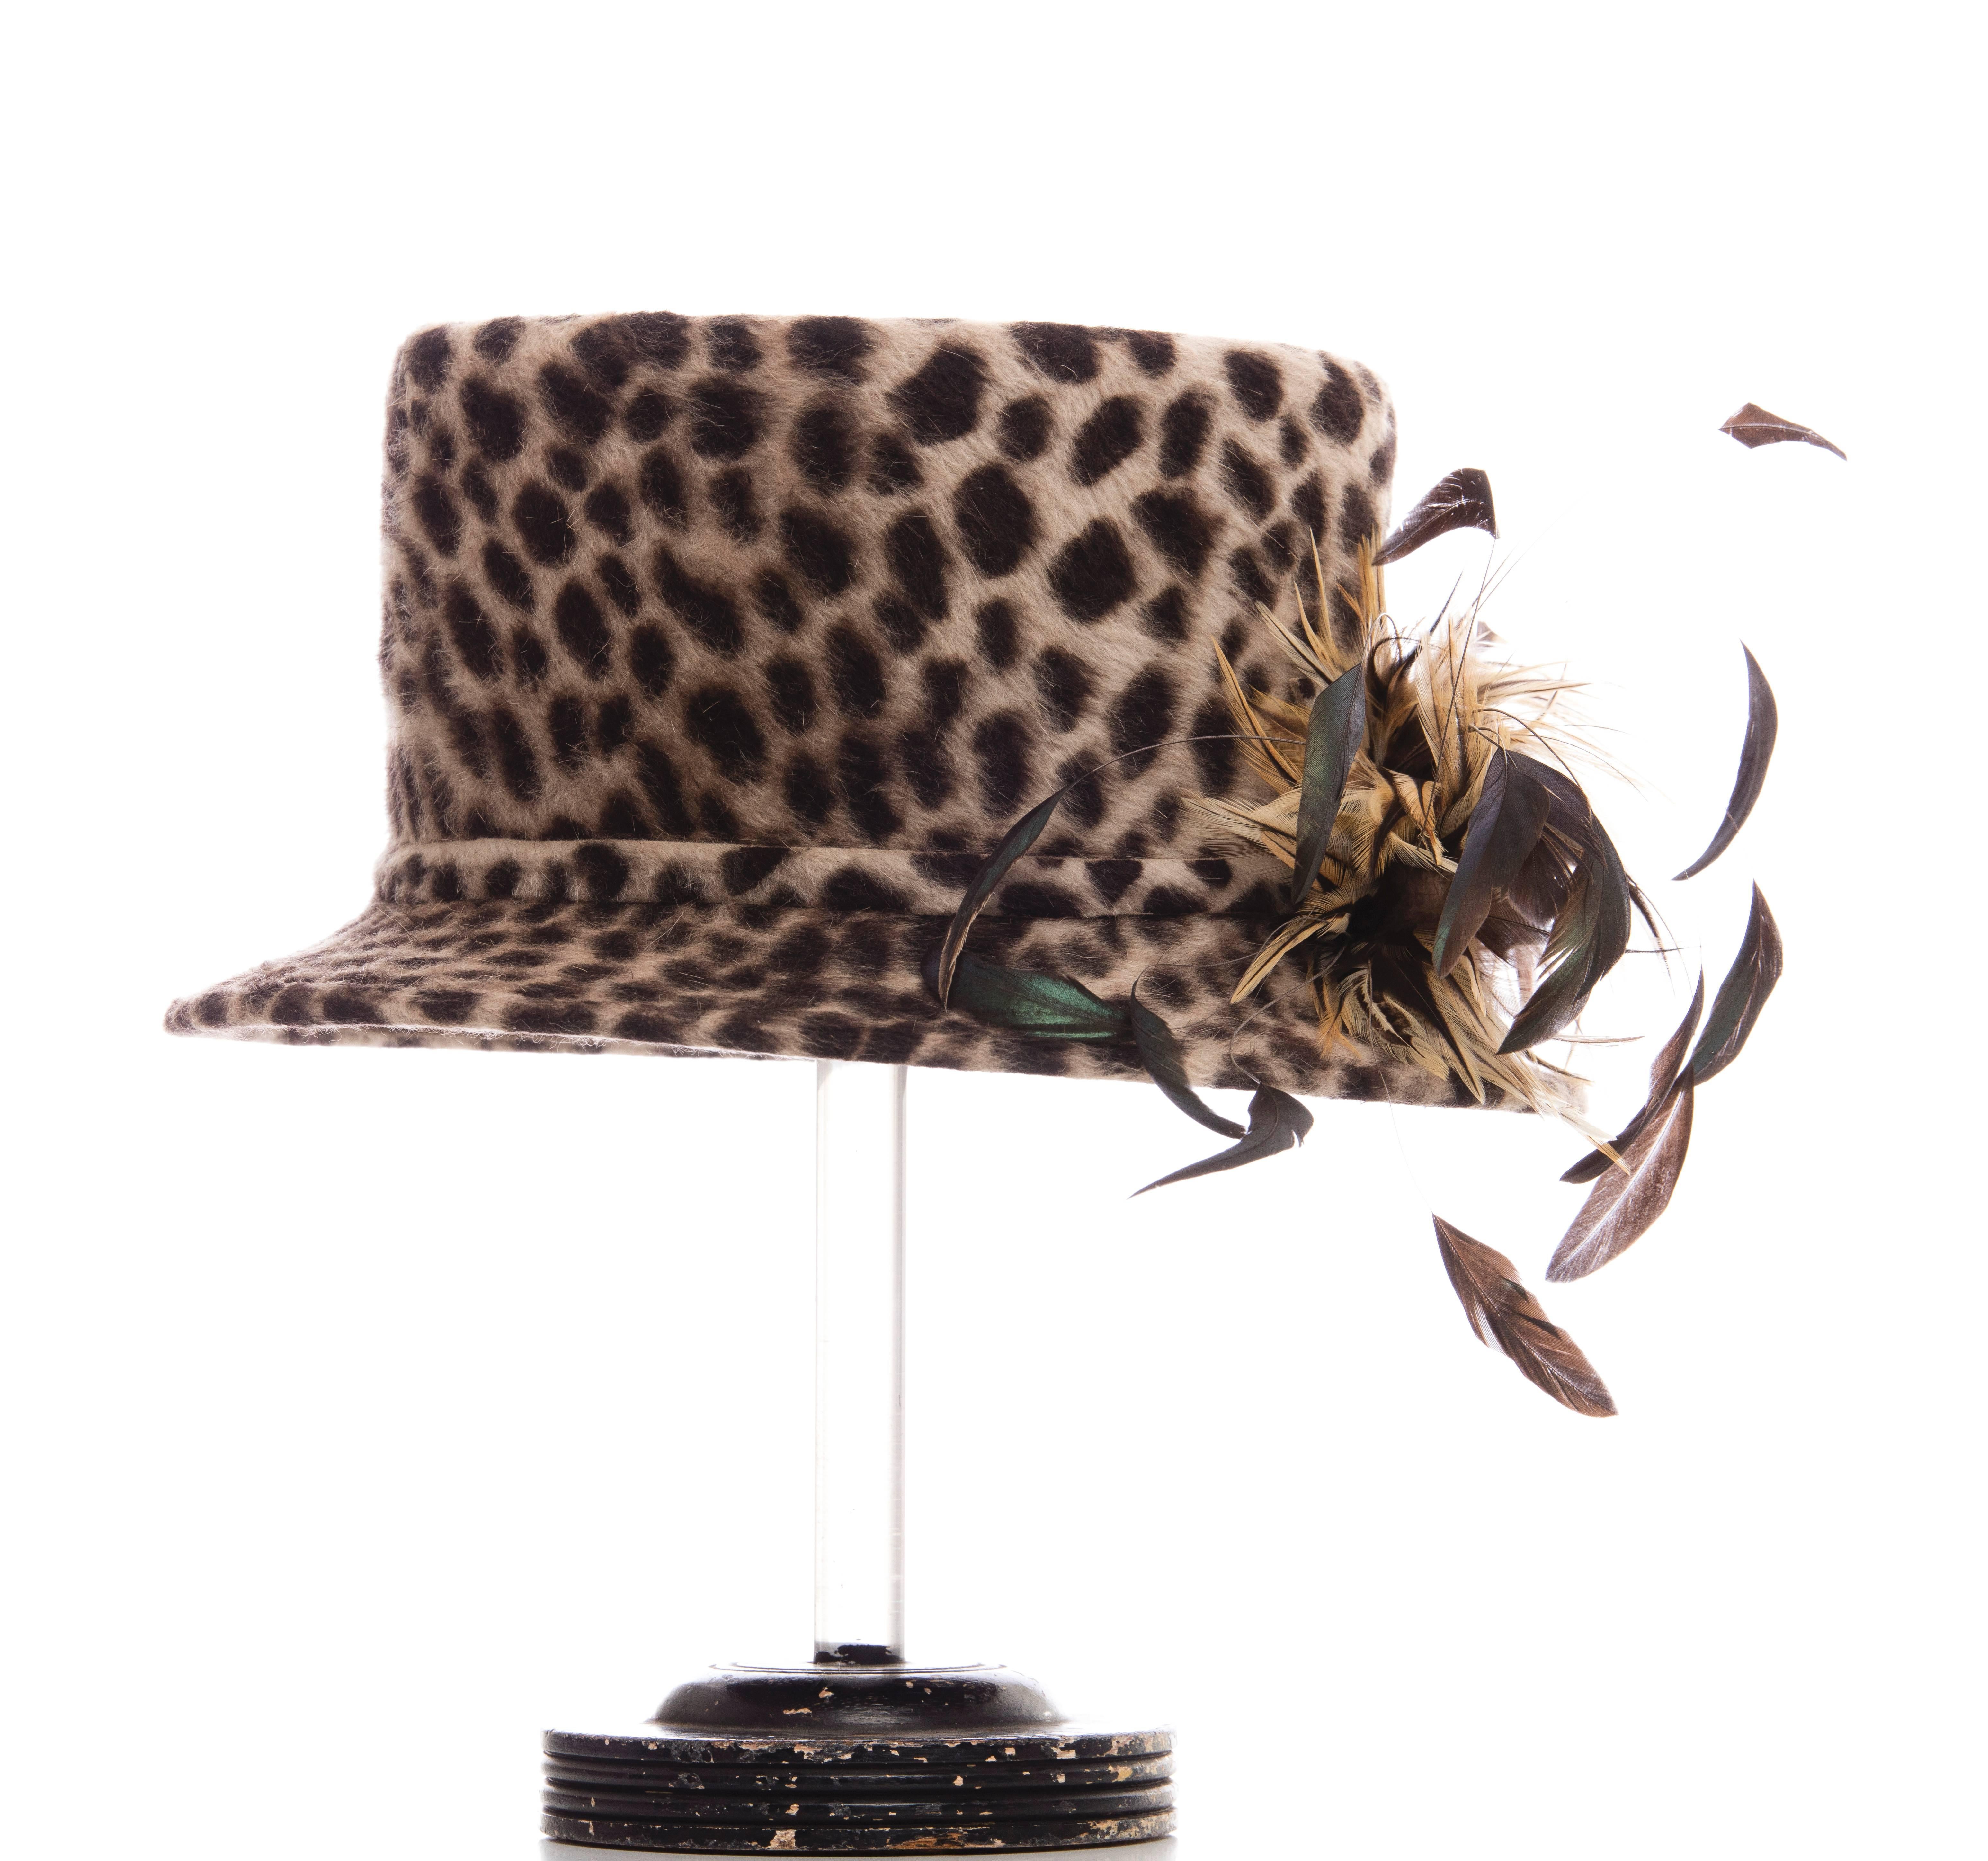  Philip Treacy wool hat with cheetah print throughout, feather accents at brim and tonal stitching throughout. Includes box.

Circumference 25”, Brim 2.25”